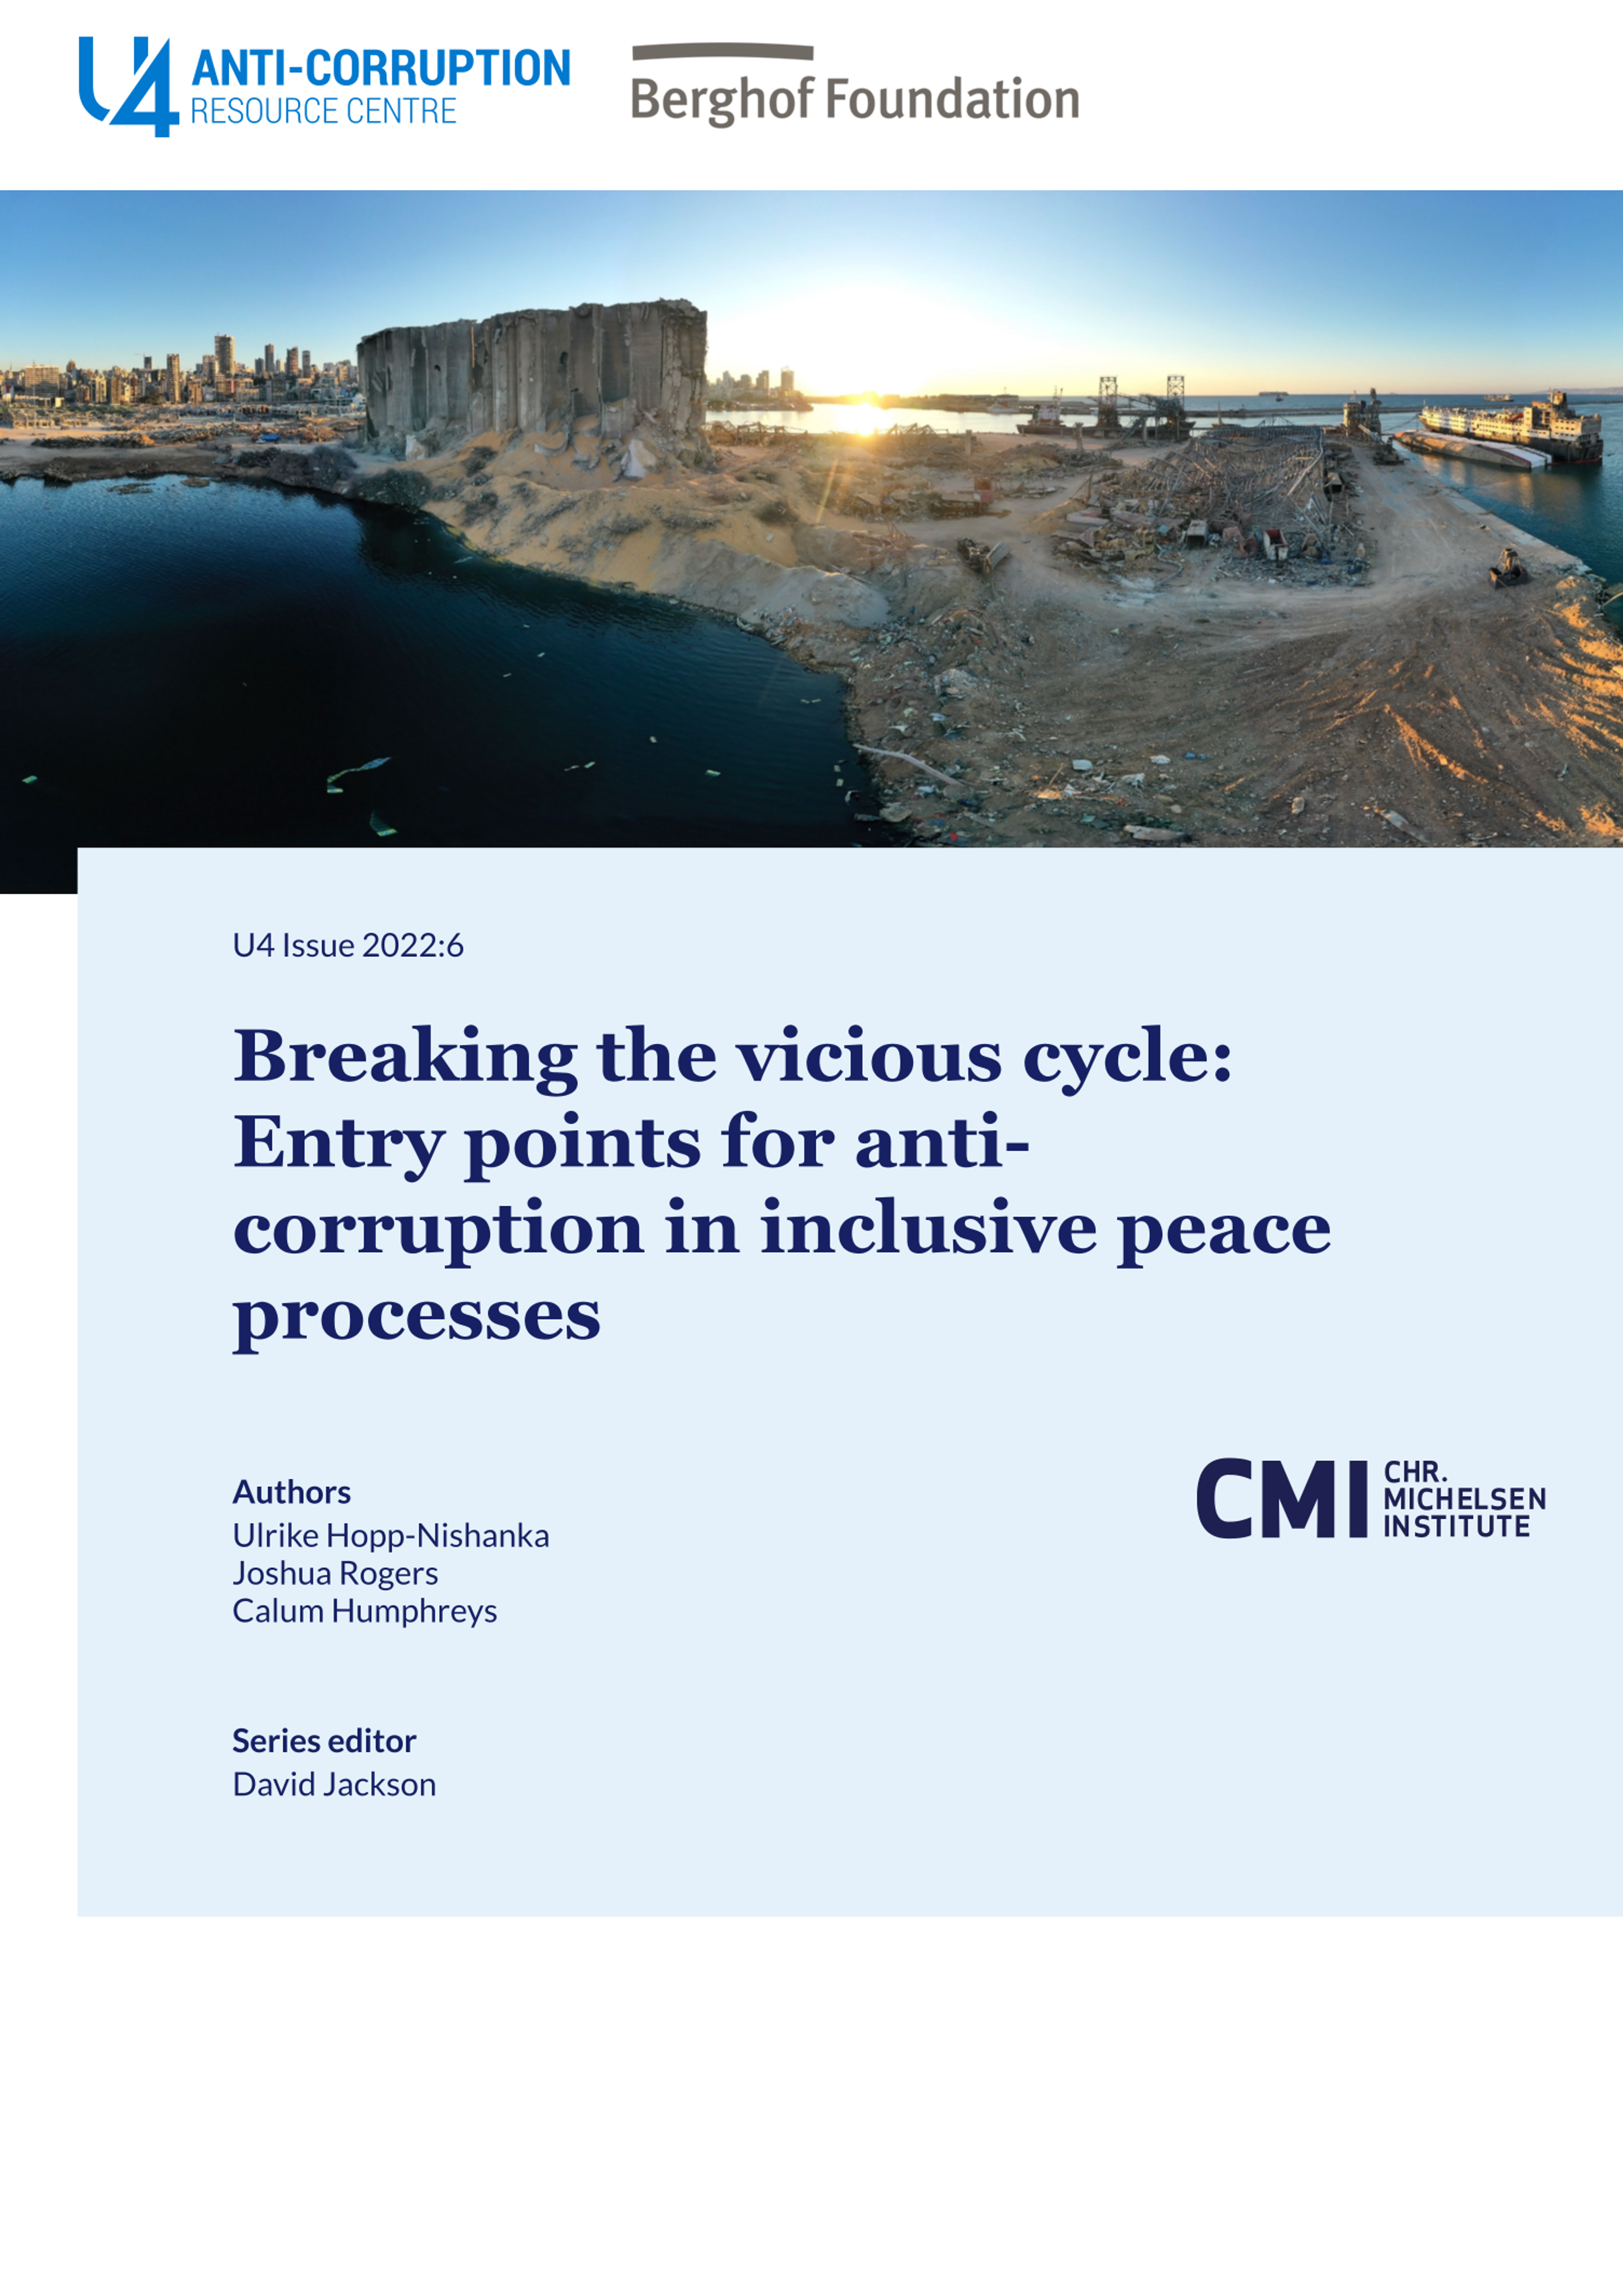 Breaking the vicious cycle: Entry points for anti-corruption in inclusive peace processes